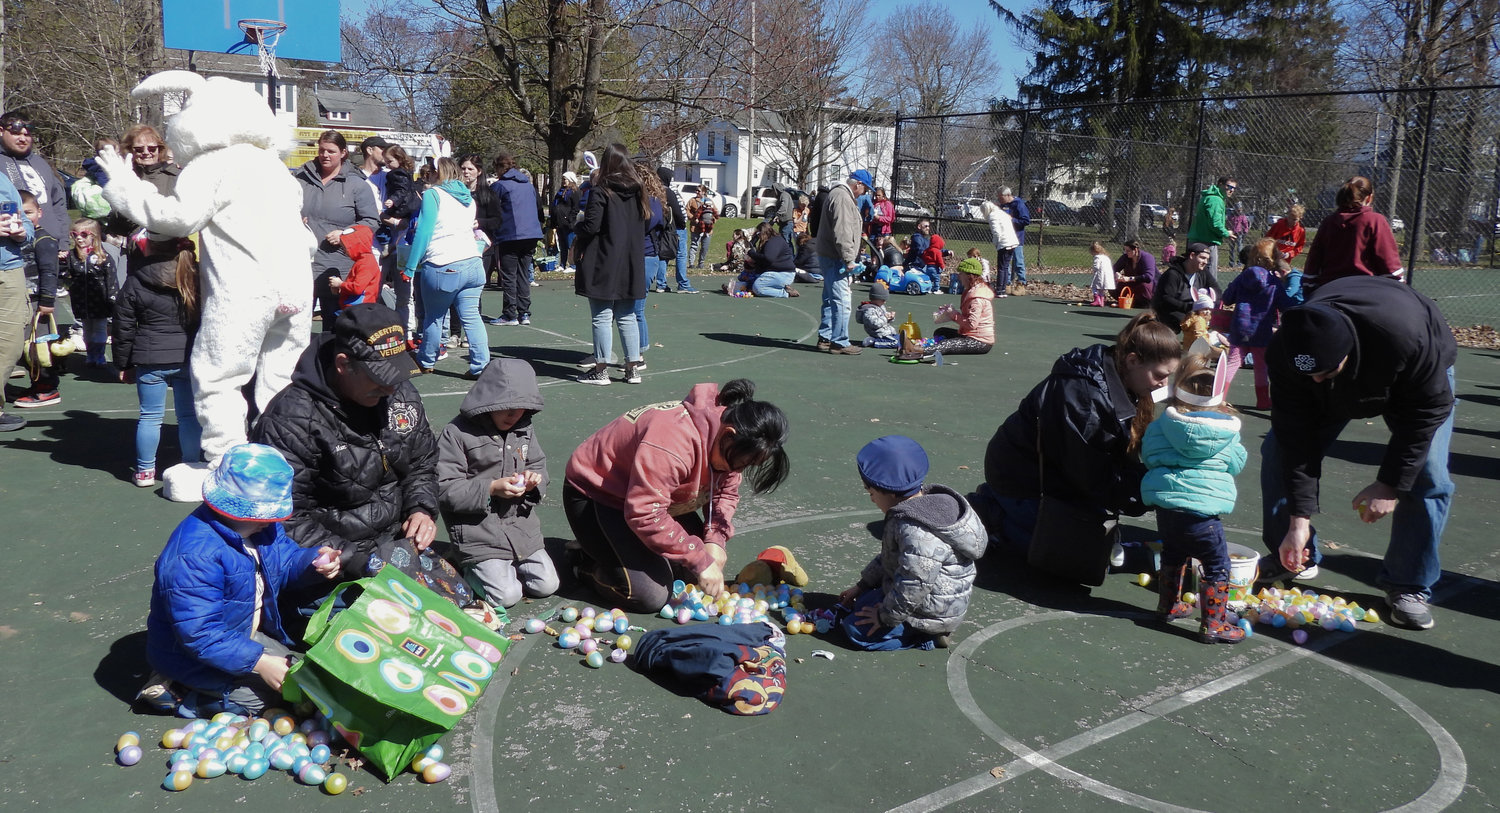 The annual Oneida Easter Egg Hunt saw kids of all ages in Allen Park filling their bags and baskets with eggs on Saturday, April 8 in Oneida. Pictured are parents helping their children open eggs after the hunt.